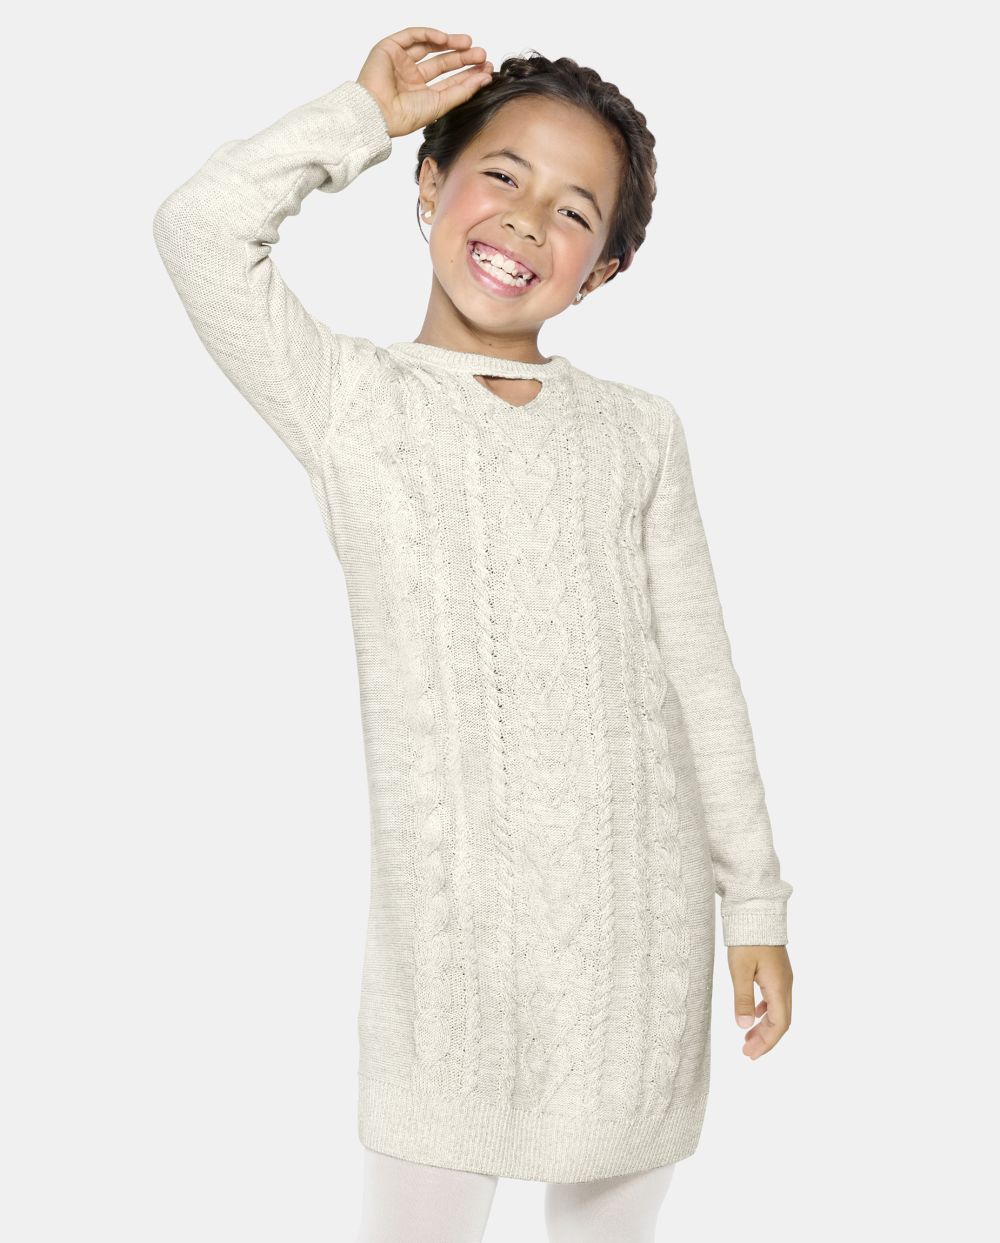 Girls Long Sleeves Above the Knee Cutout Crew Neck Sweater Dress